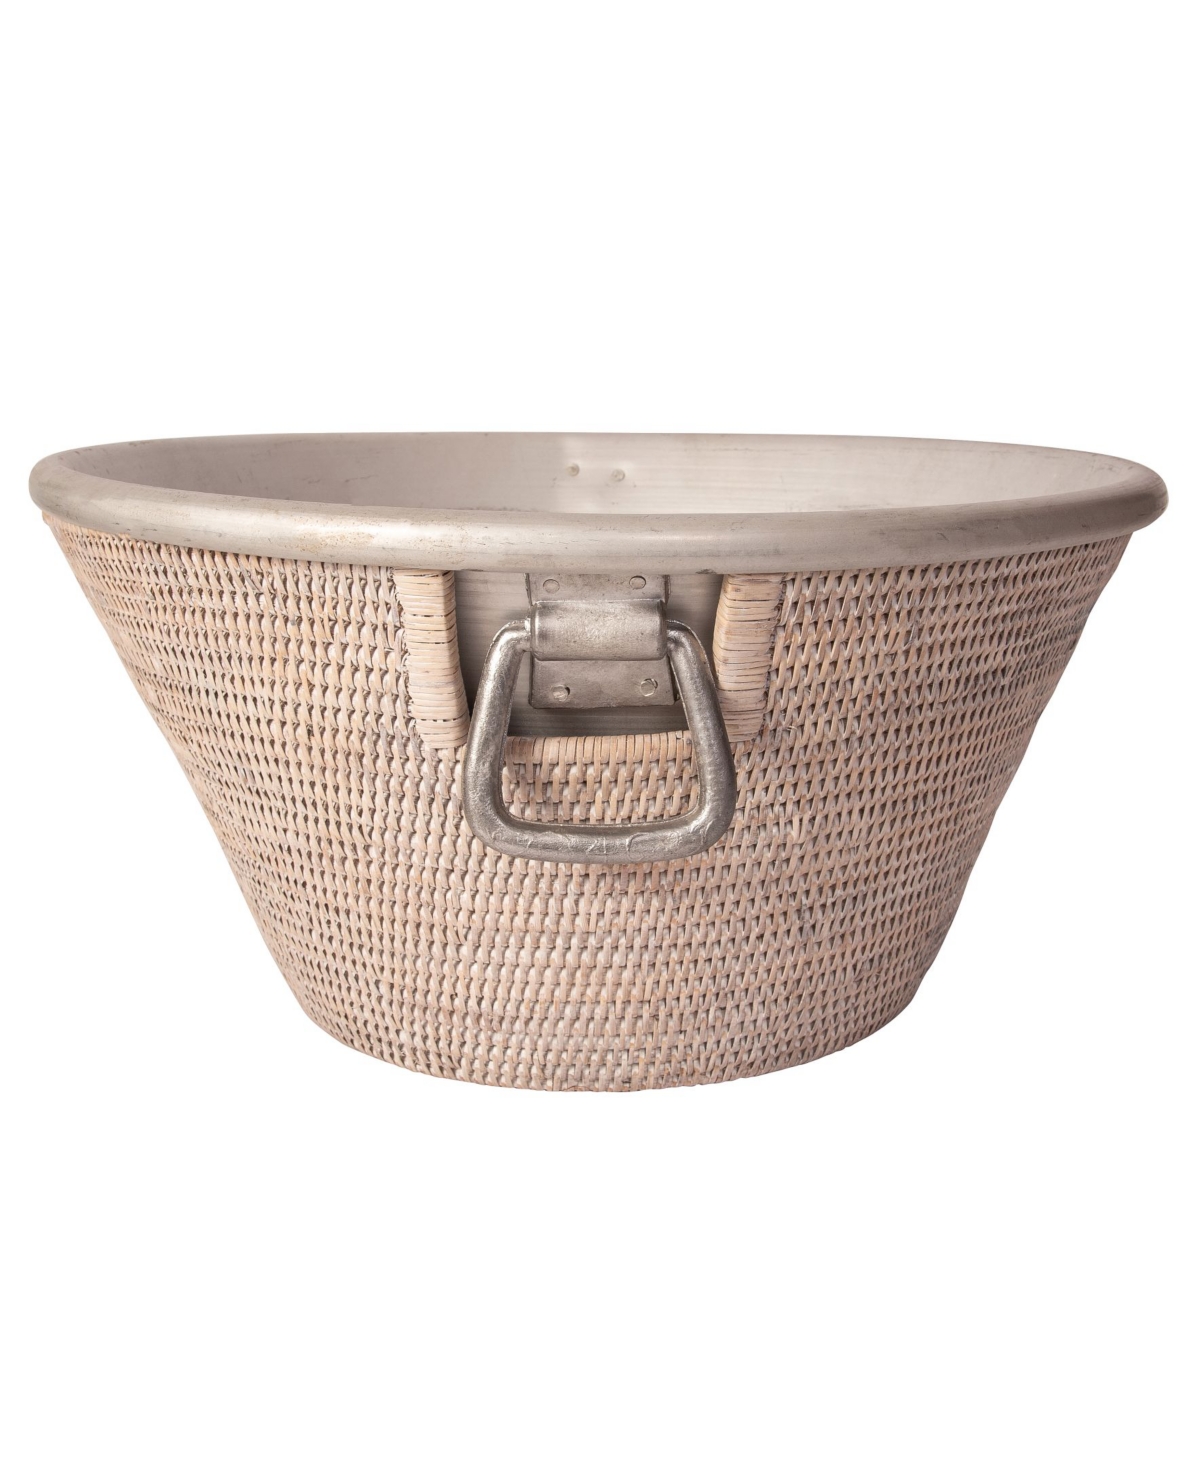 Artifacts Trading Company Artifacts Rattan Ice Tub In Open White